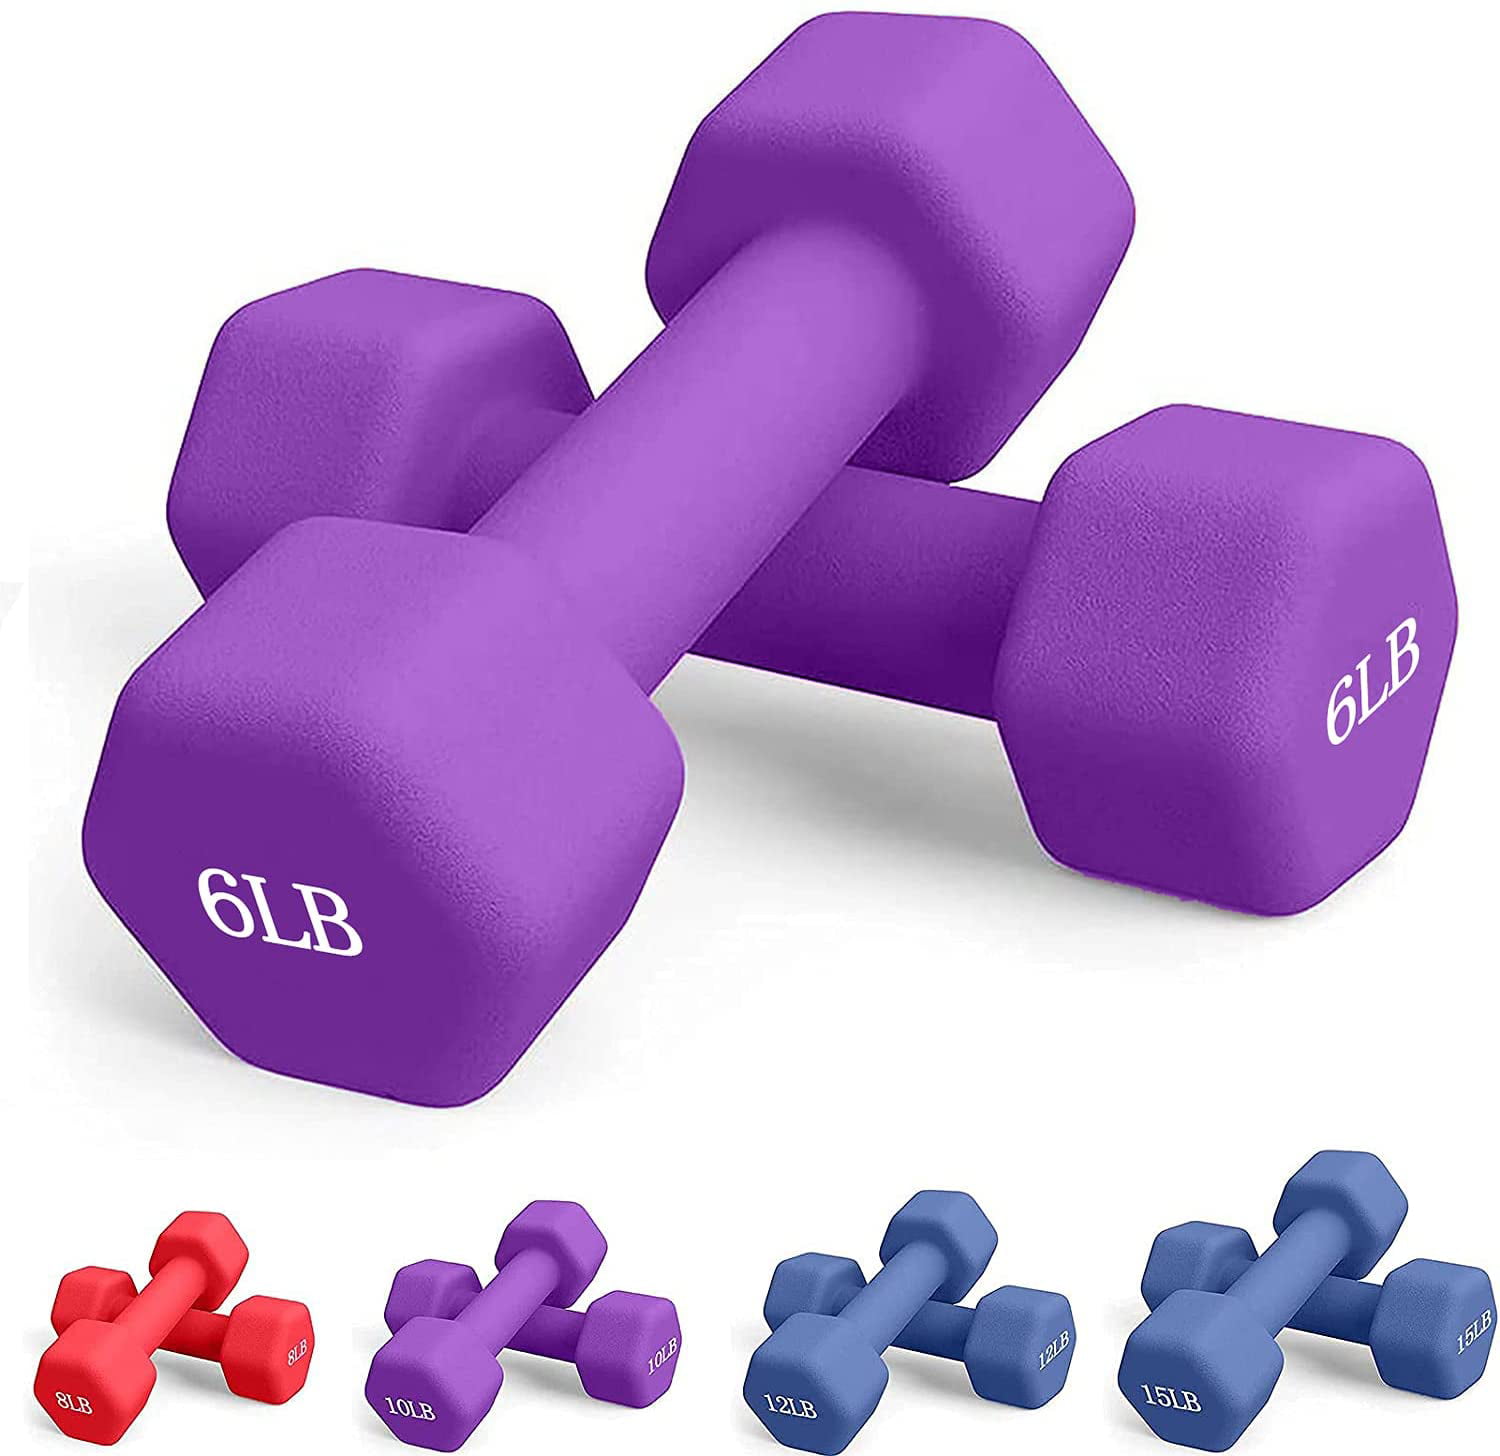 Individual 5 lb Pound Neoprene Dumbbell Gym Weights 2 Set of 